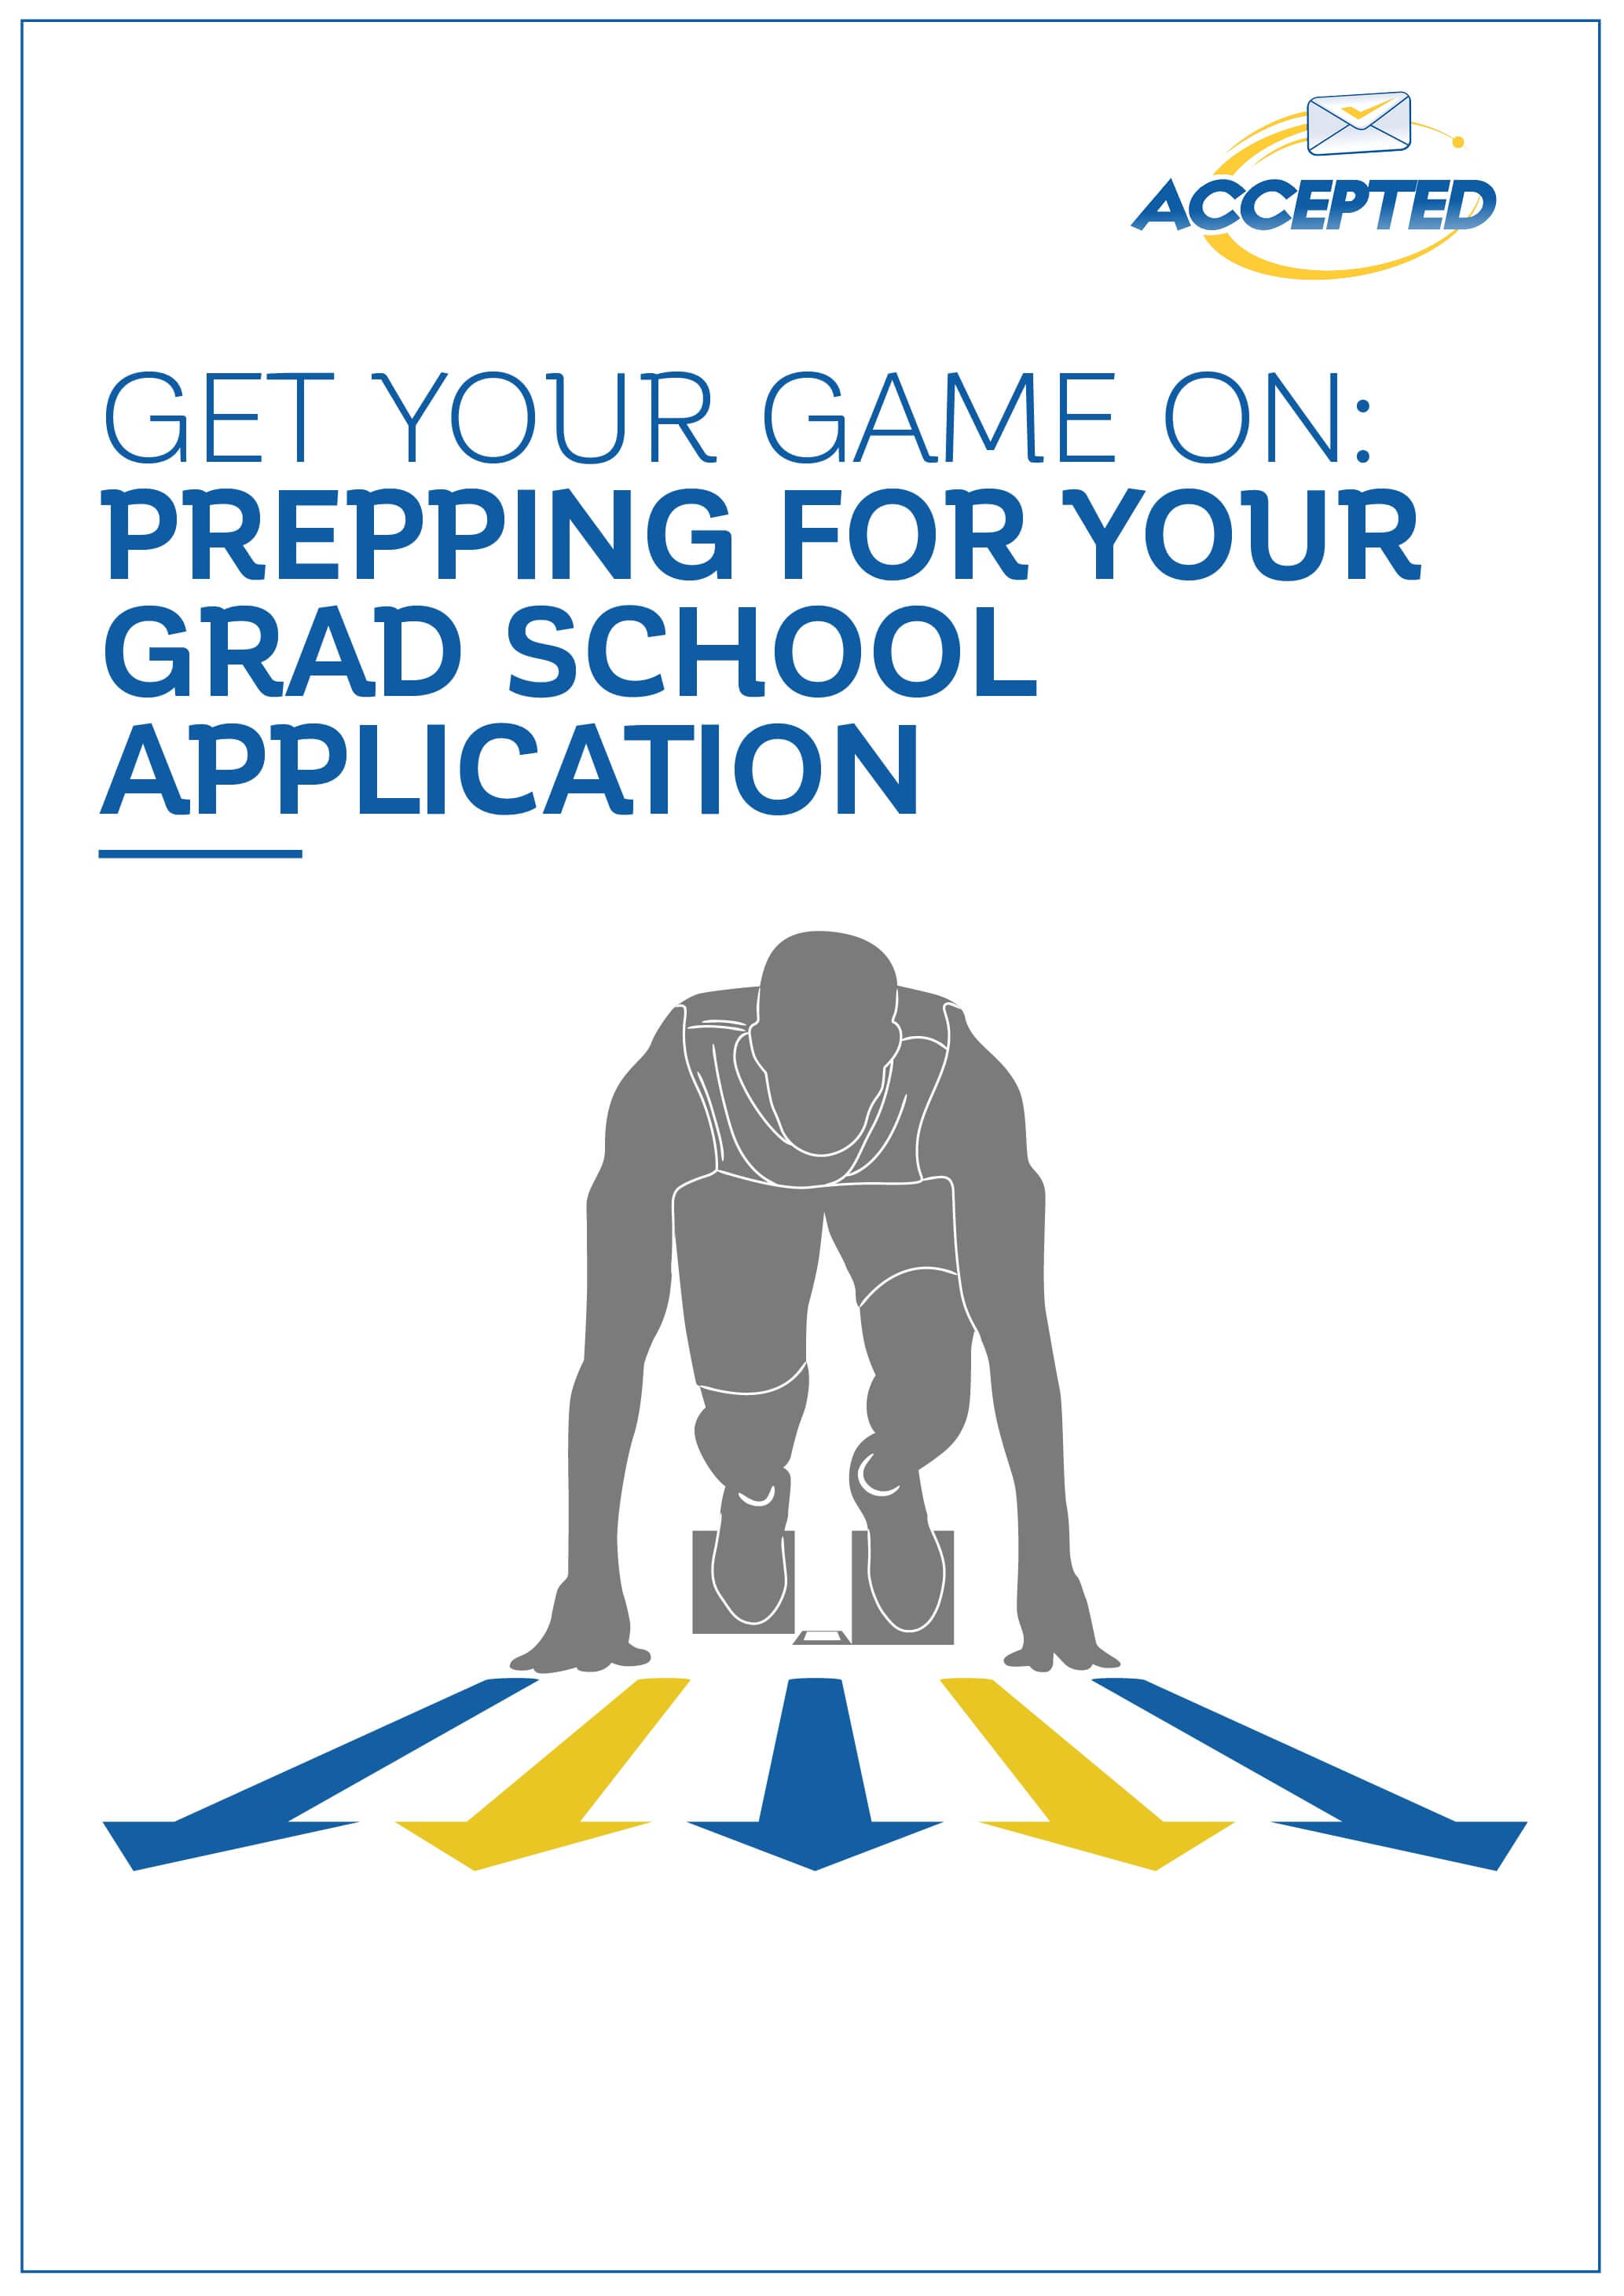 Get Your Game On: Prepping for Your Grad School Application